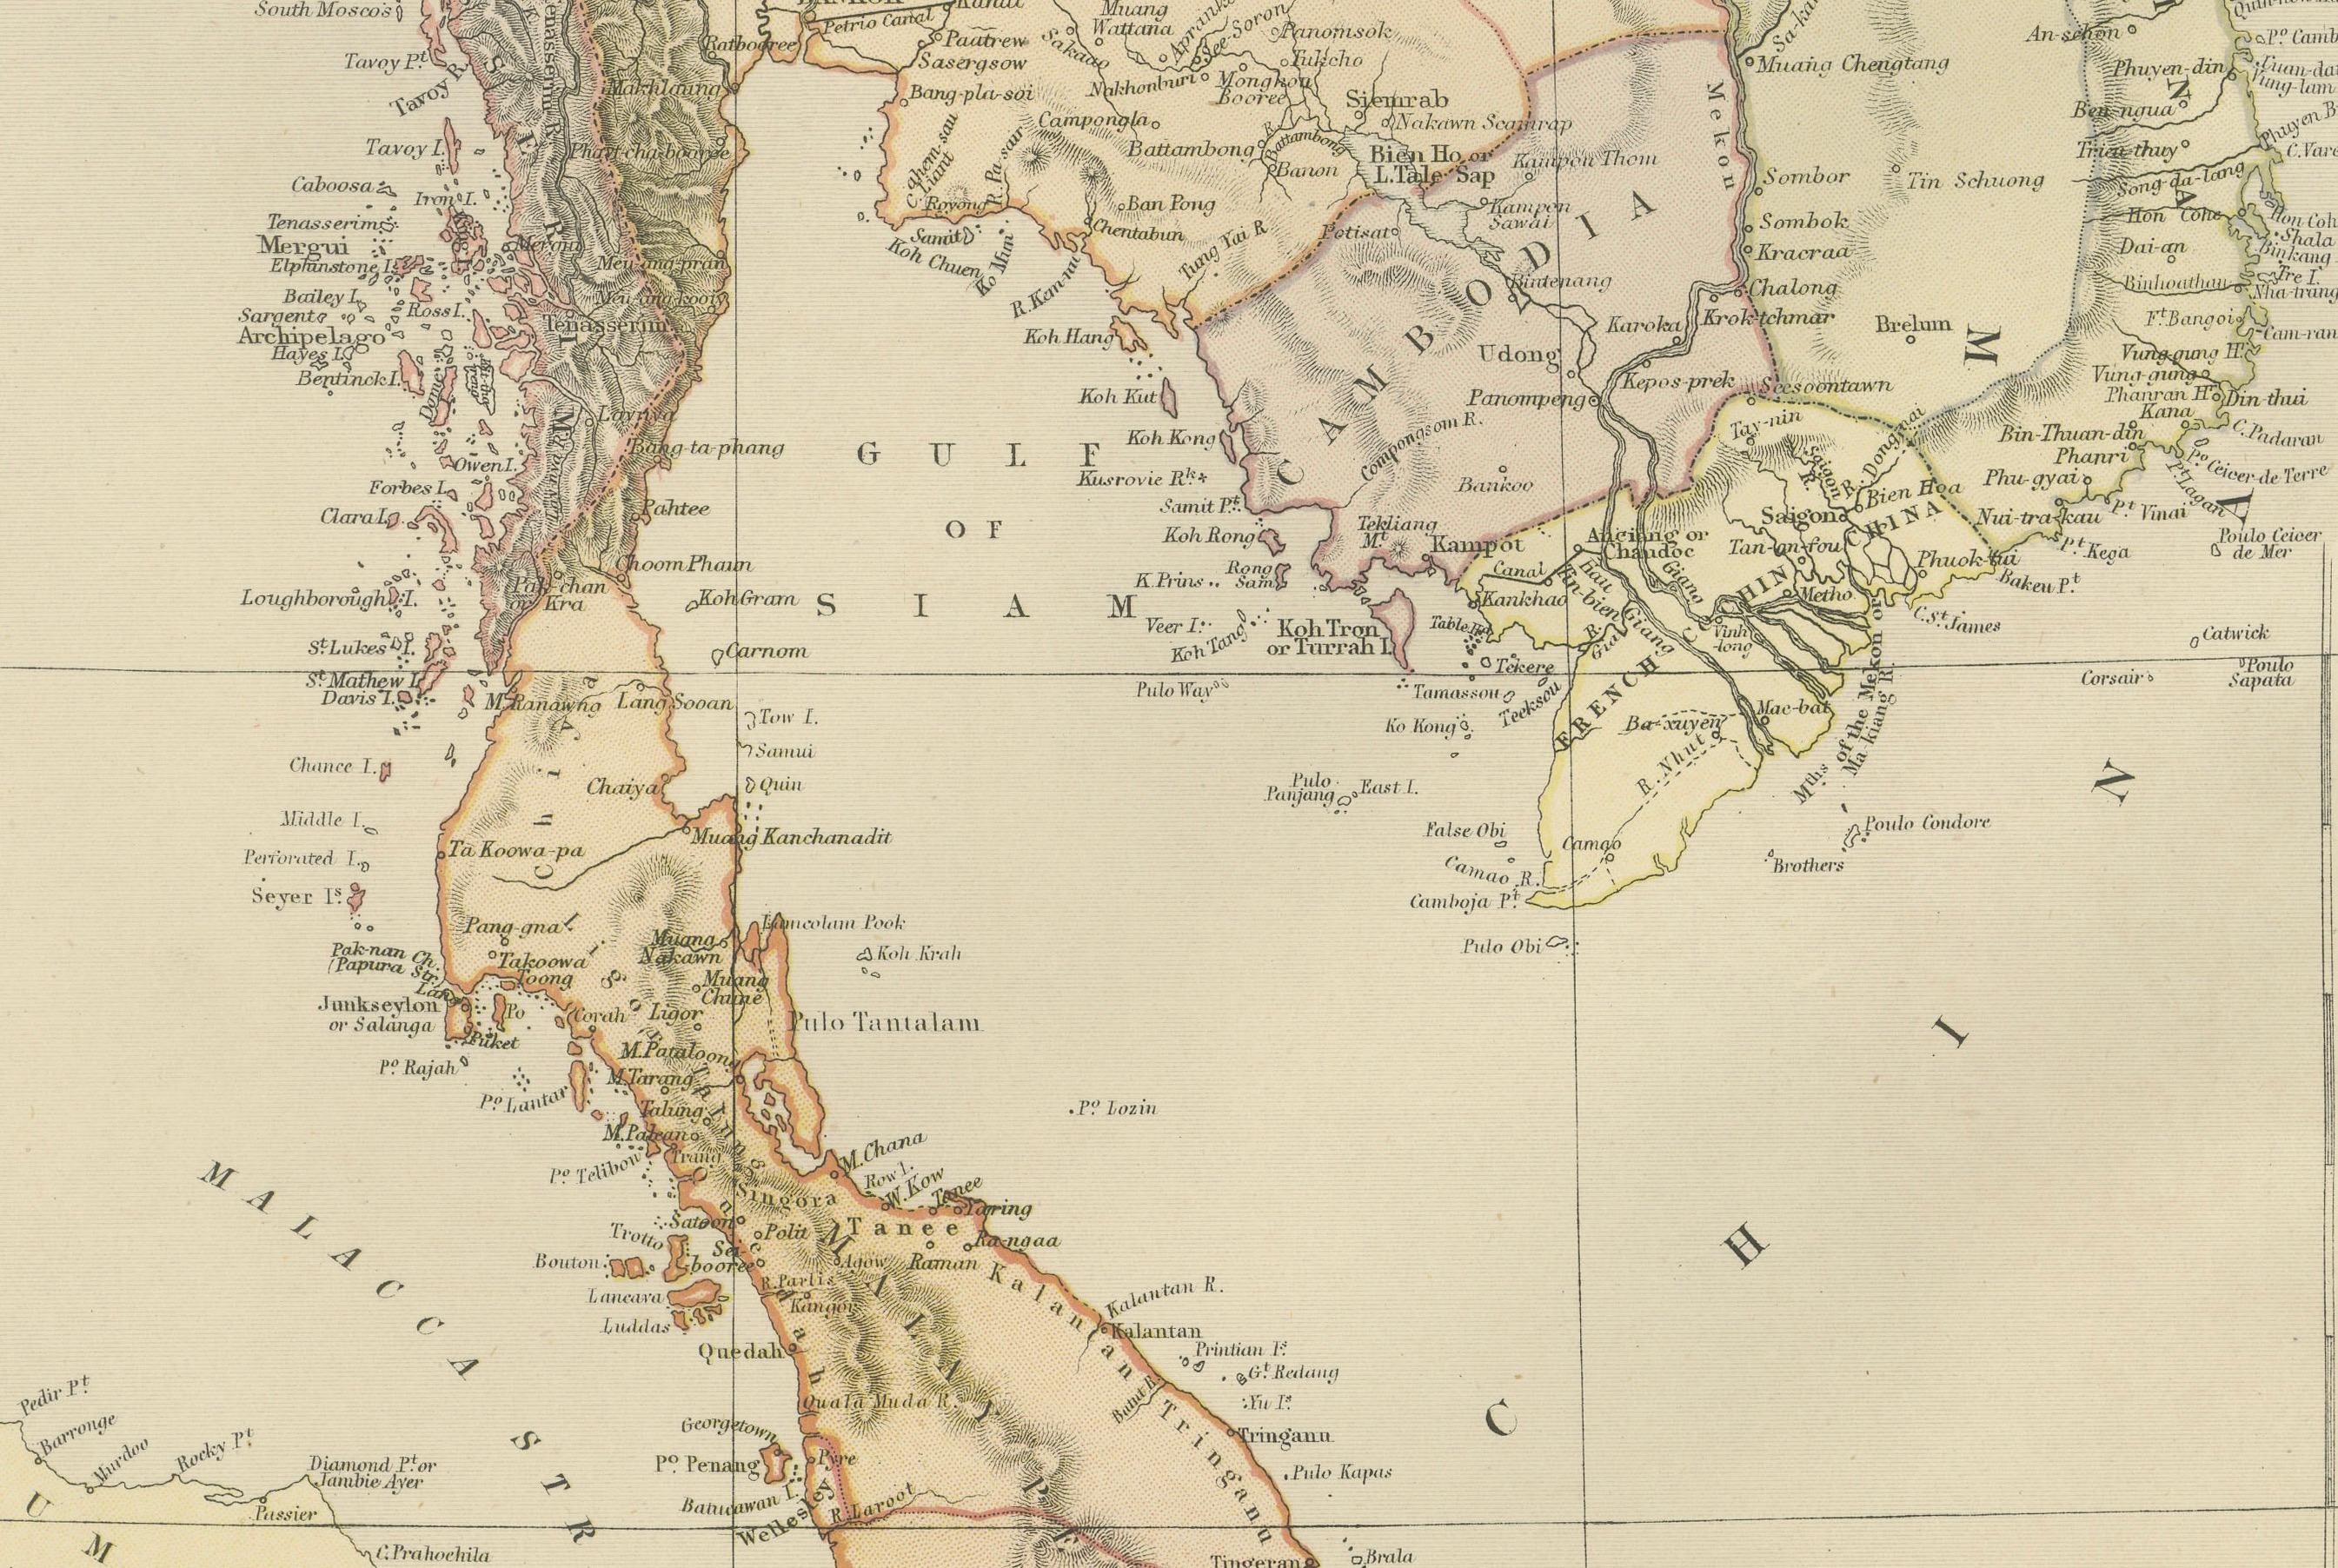 The image shows two maps side by side from the 1882 atlas by Blackie & Son. On the left, the map is titled 